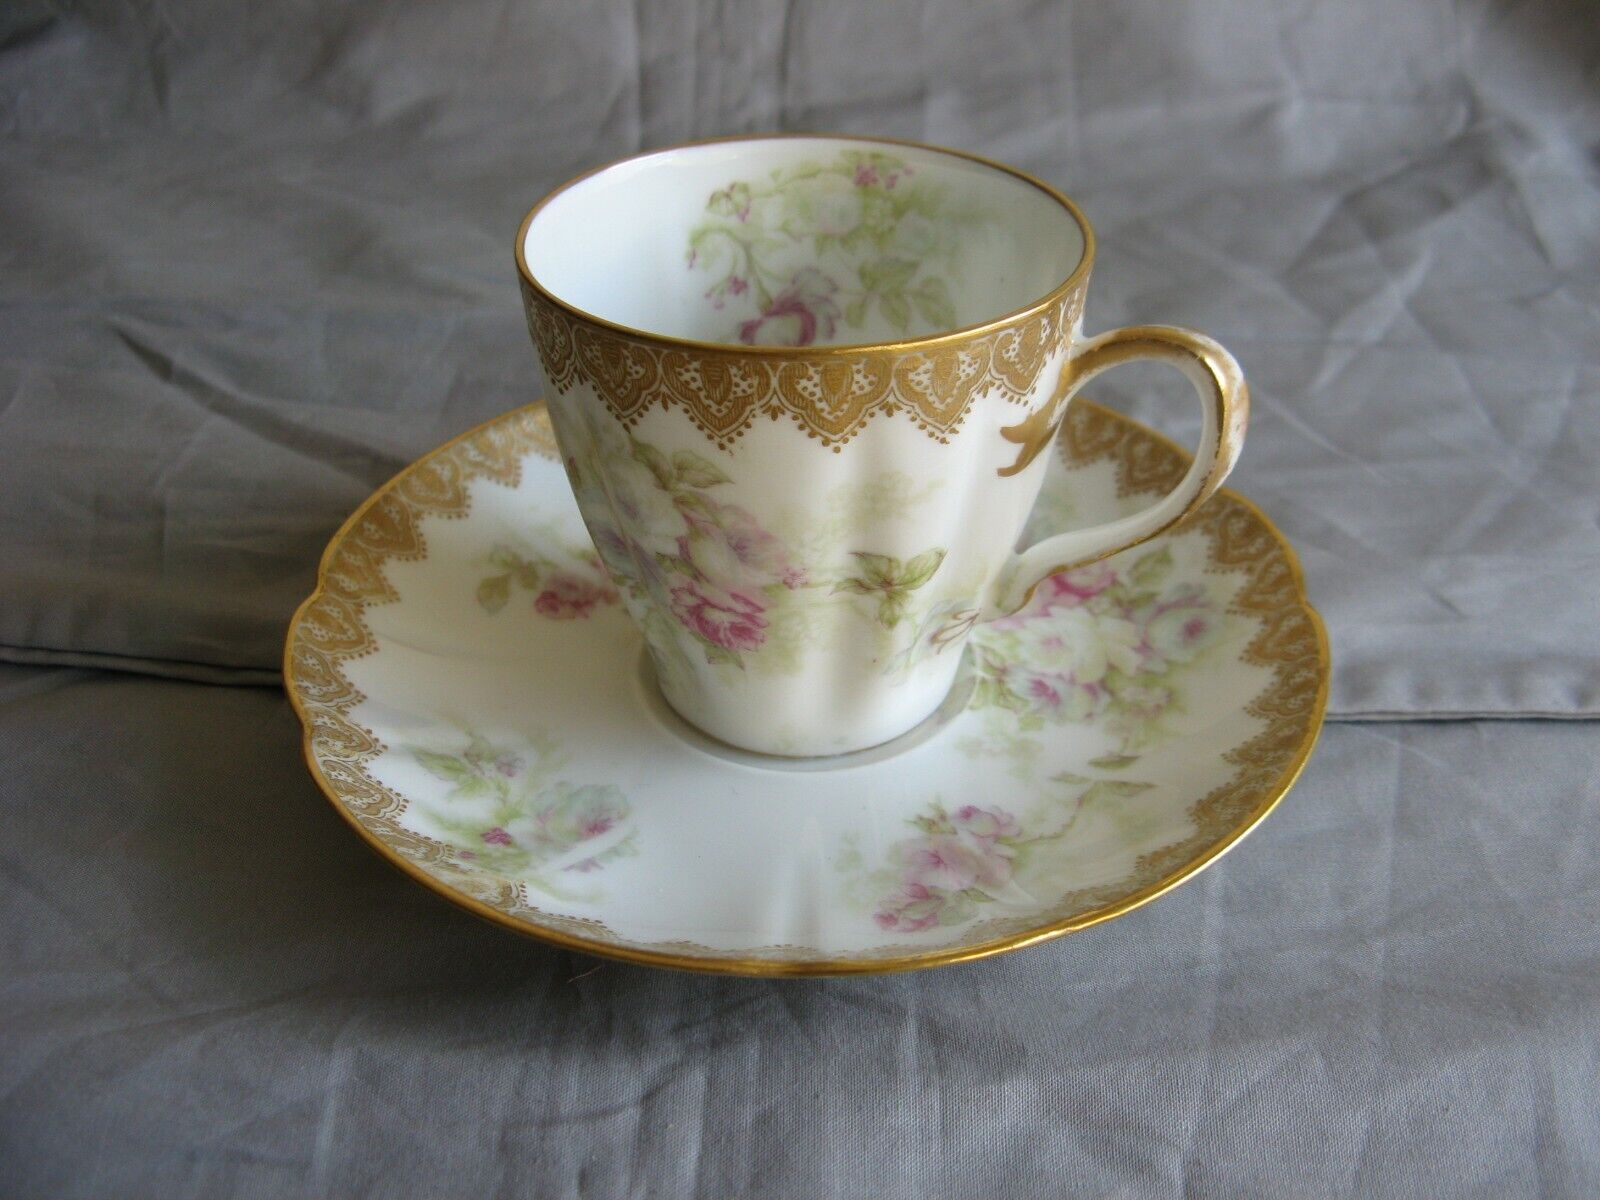 Very beautiful porcelain cup and saucer from Limoges Haviland France circa 1920